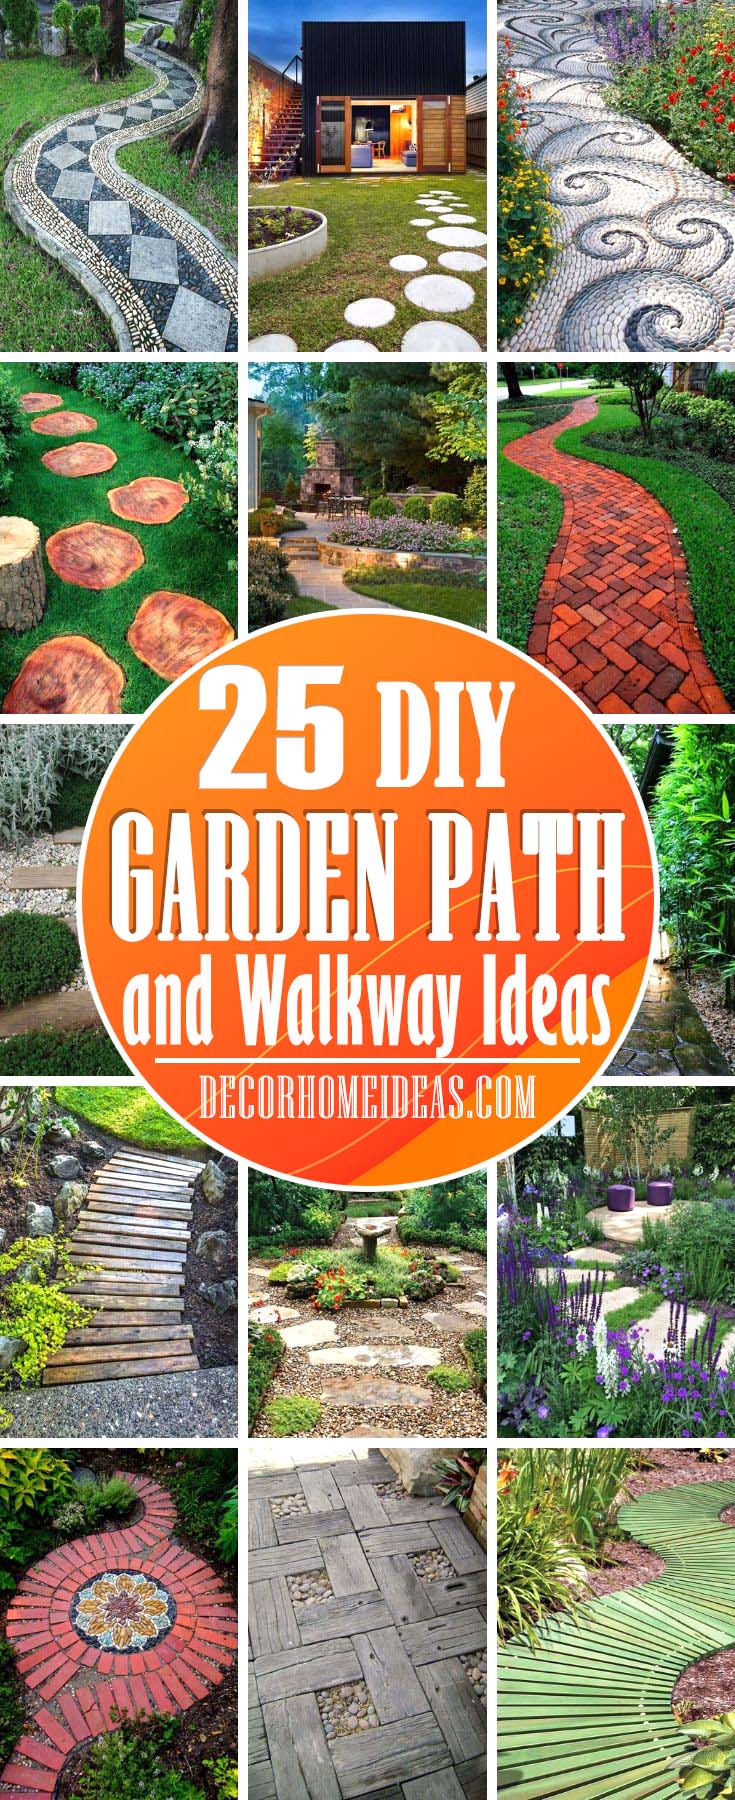 25 Beautiful Garden Path and Walkway Ideas That Are Easy To Copy